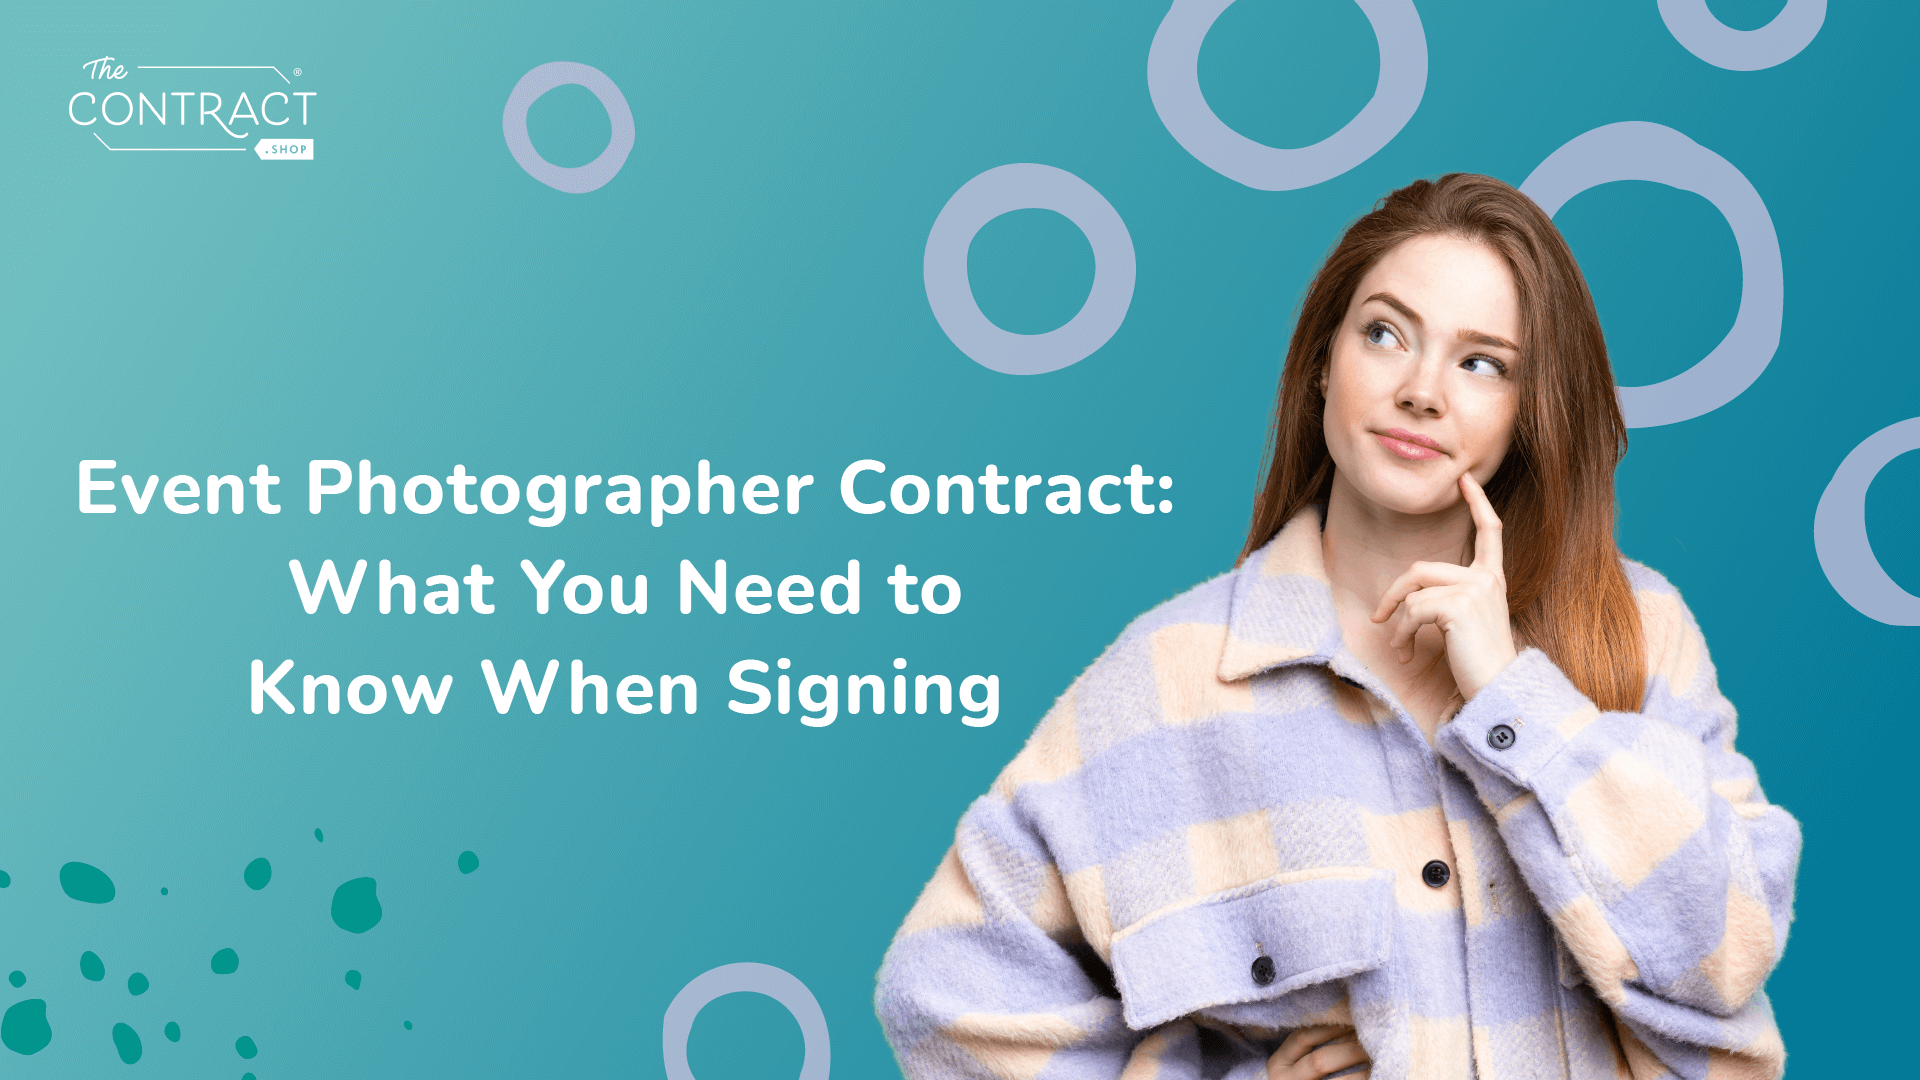 Event Photographer Contract: What You Need to Know When Signing for Your Event